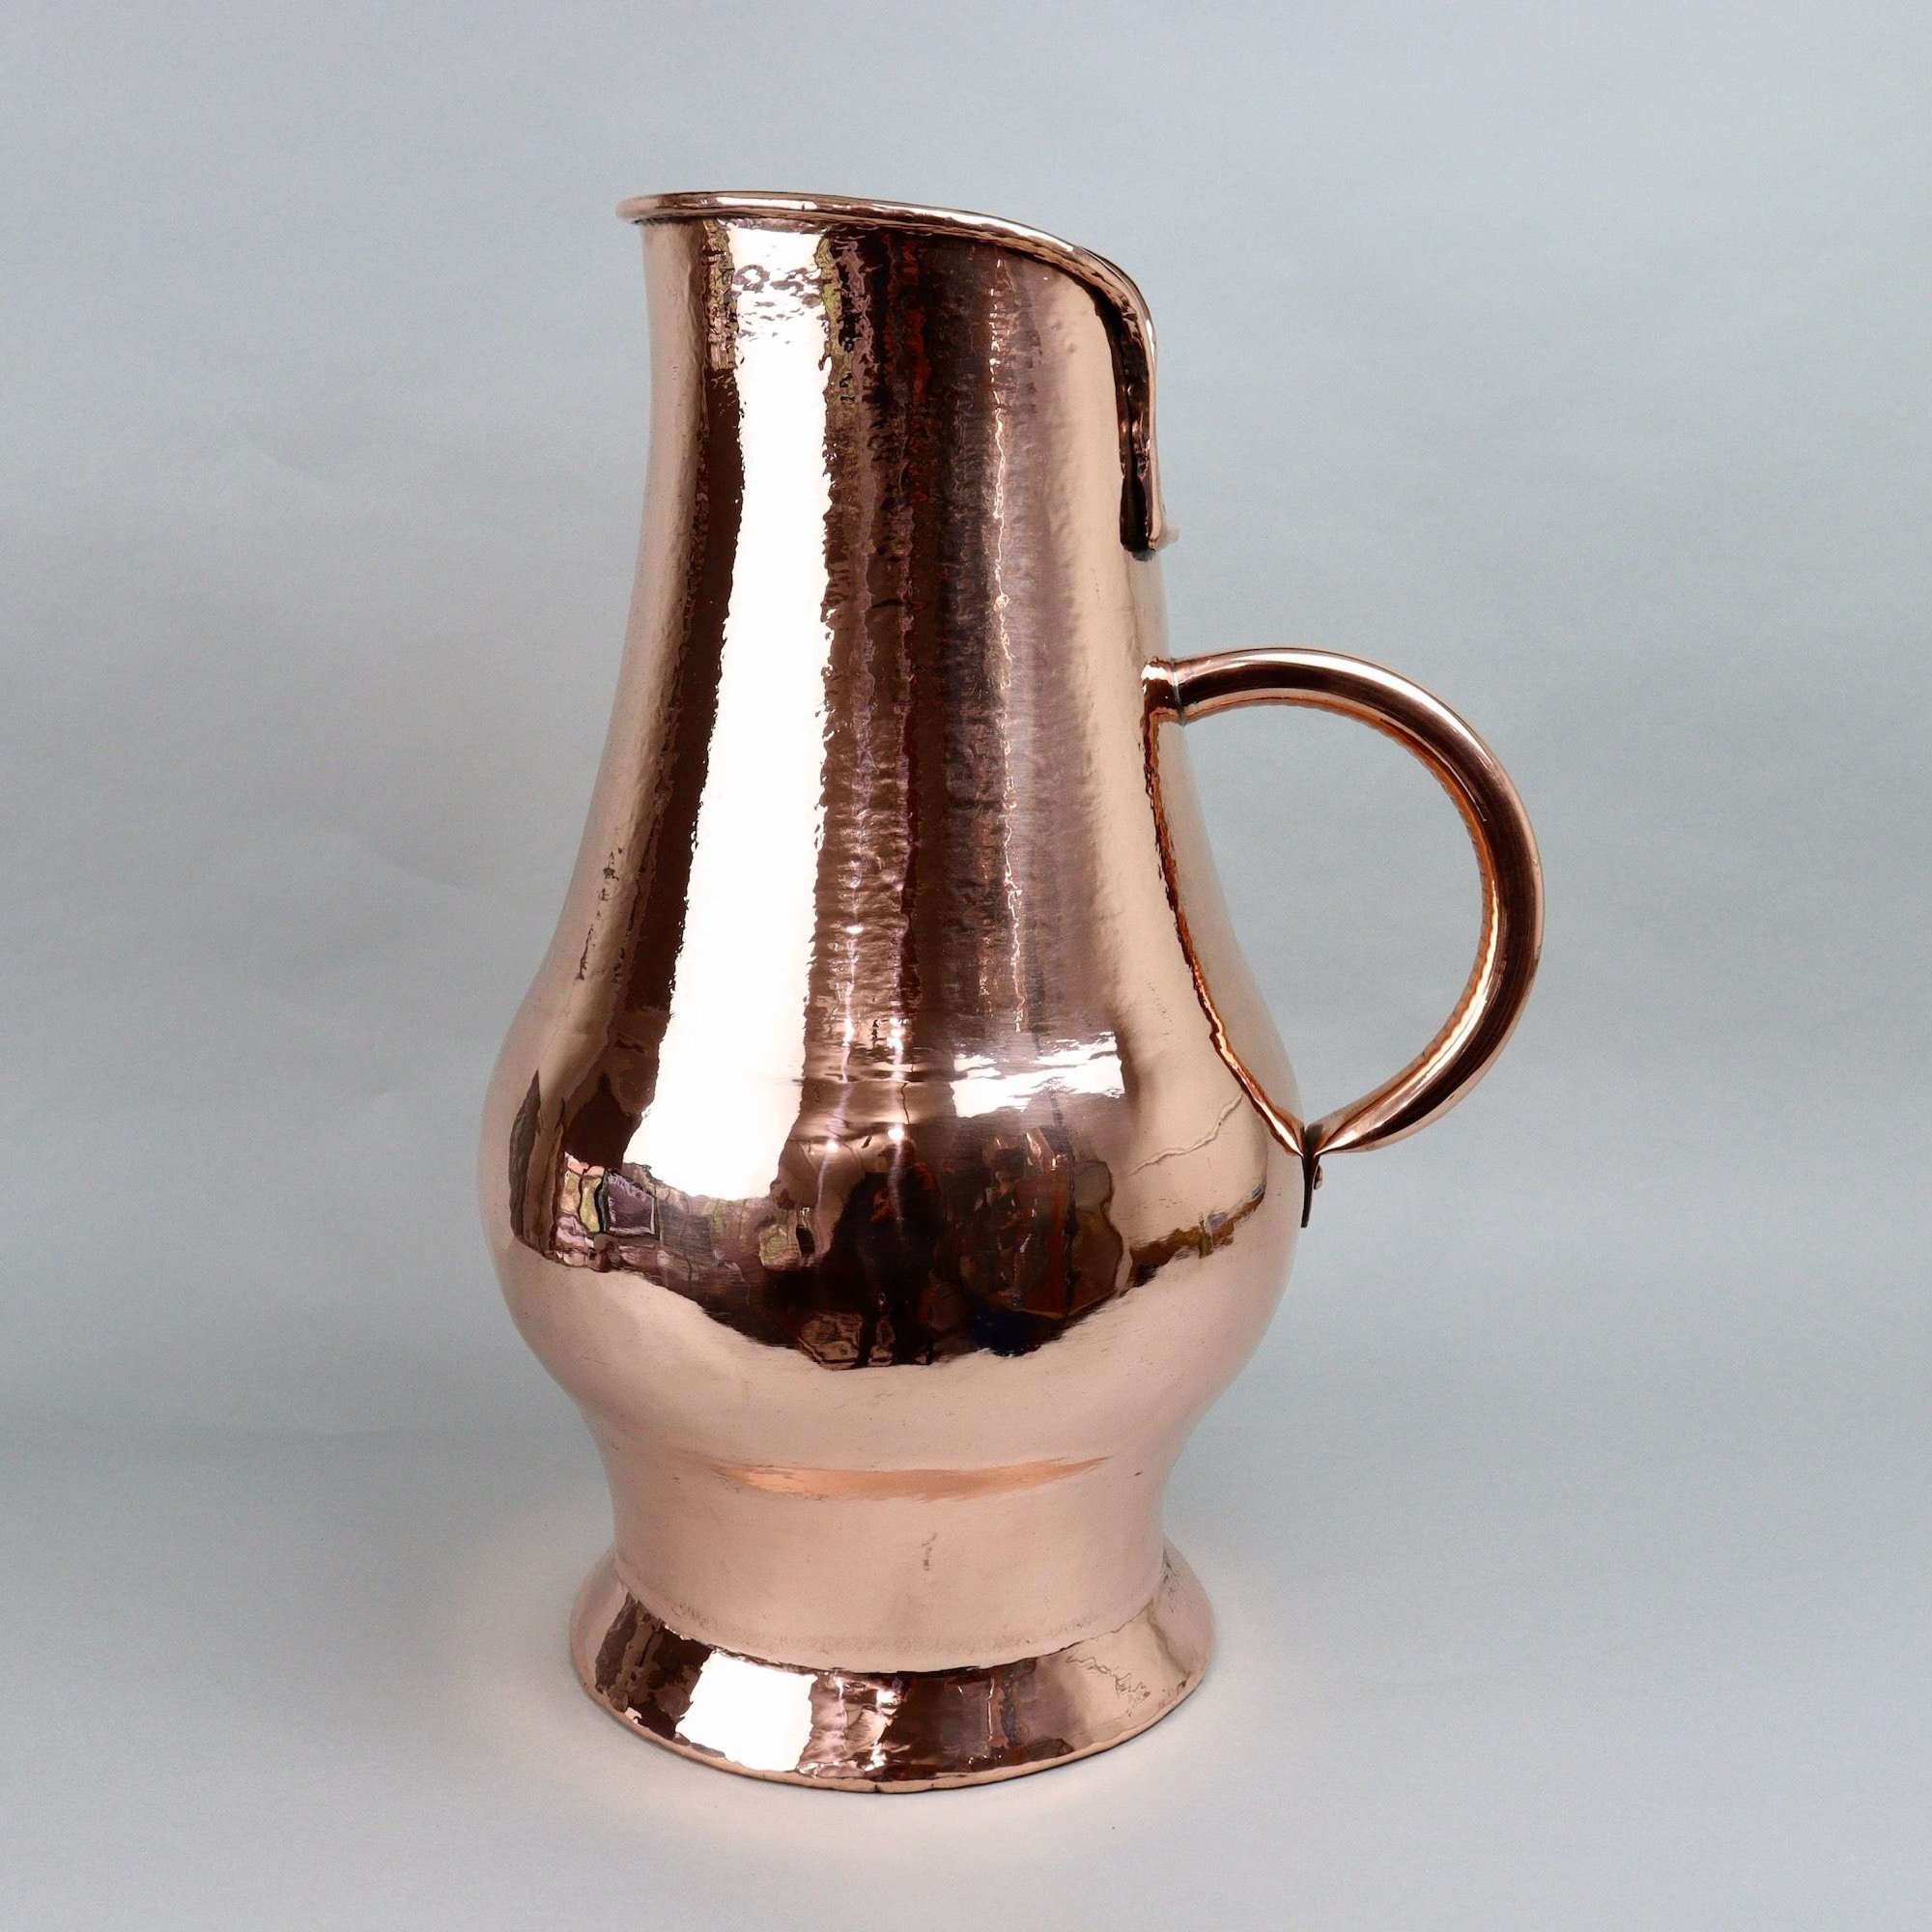 Large French Copper Cider Measure